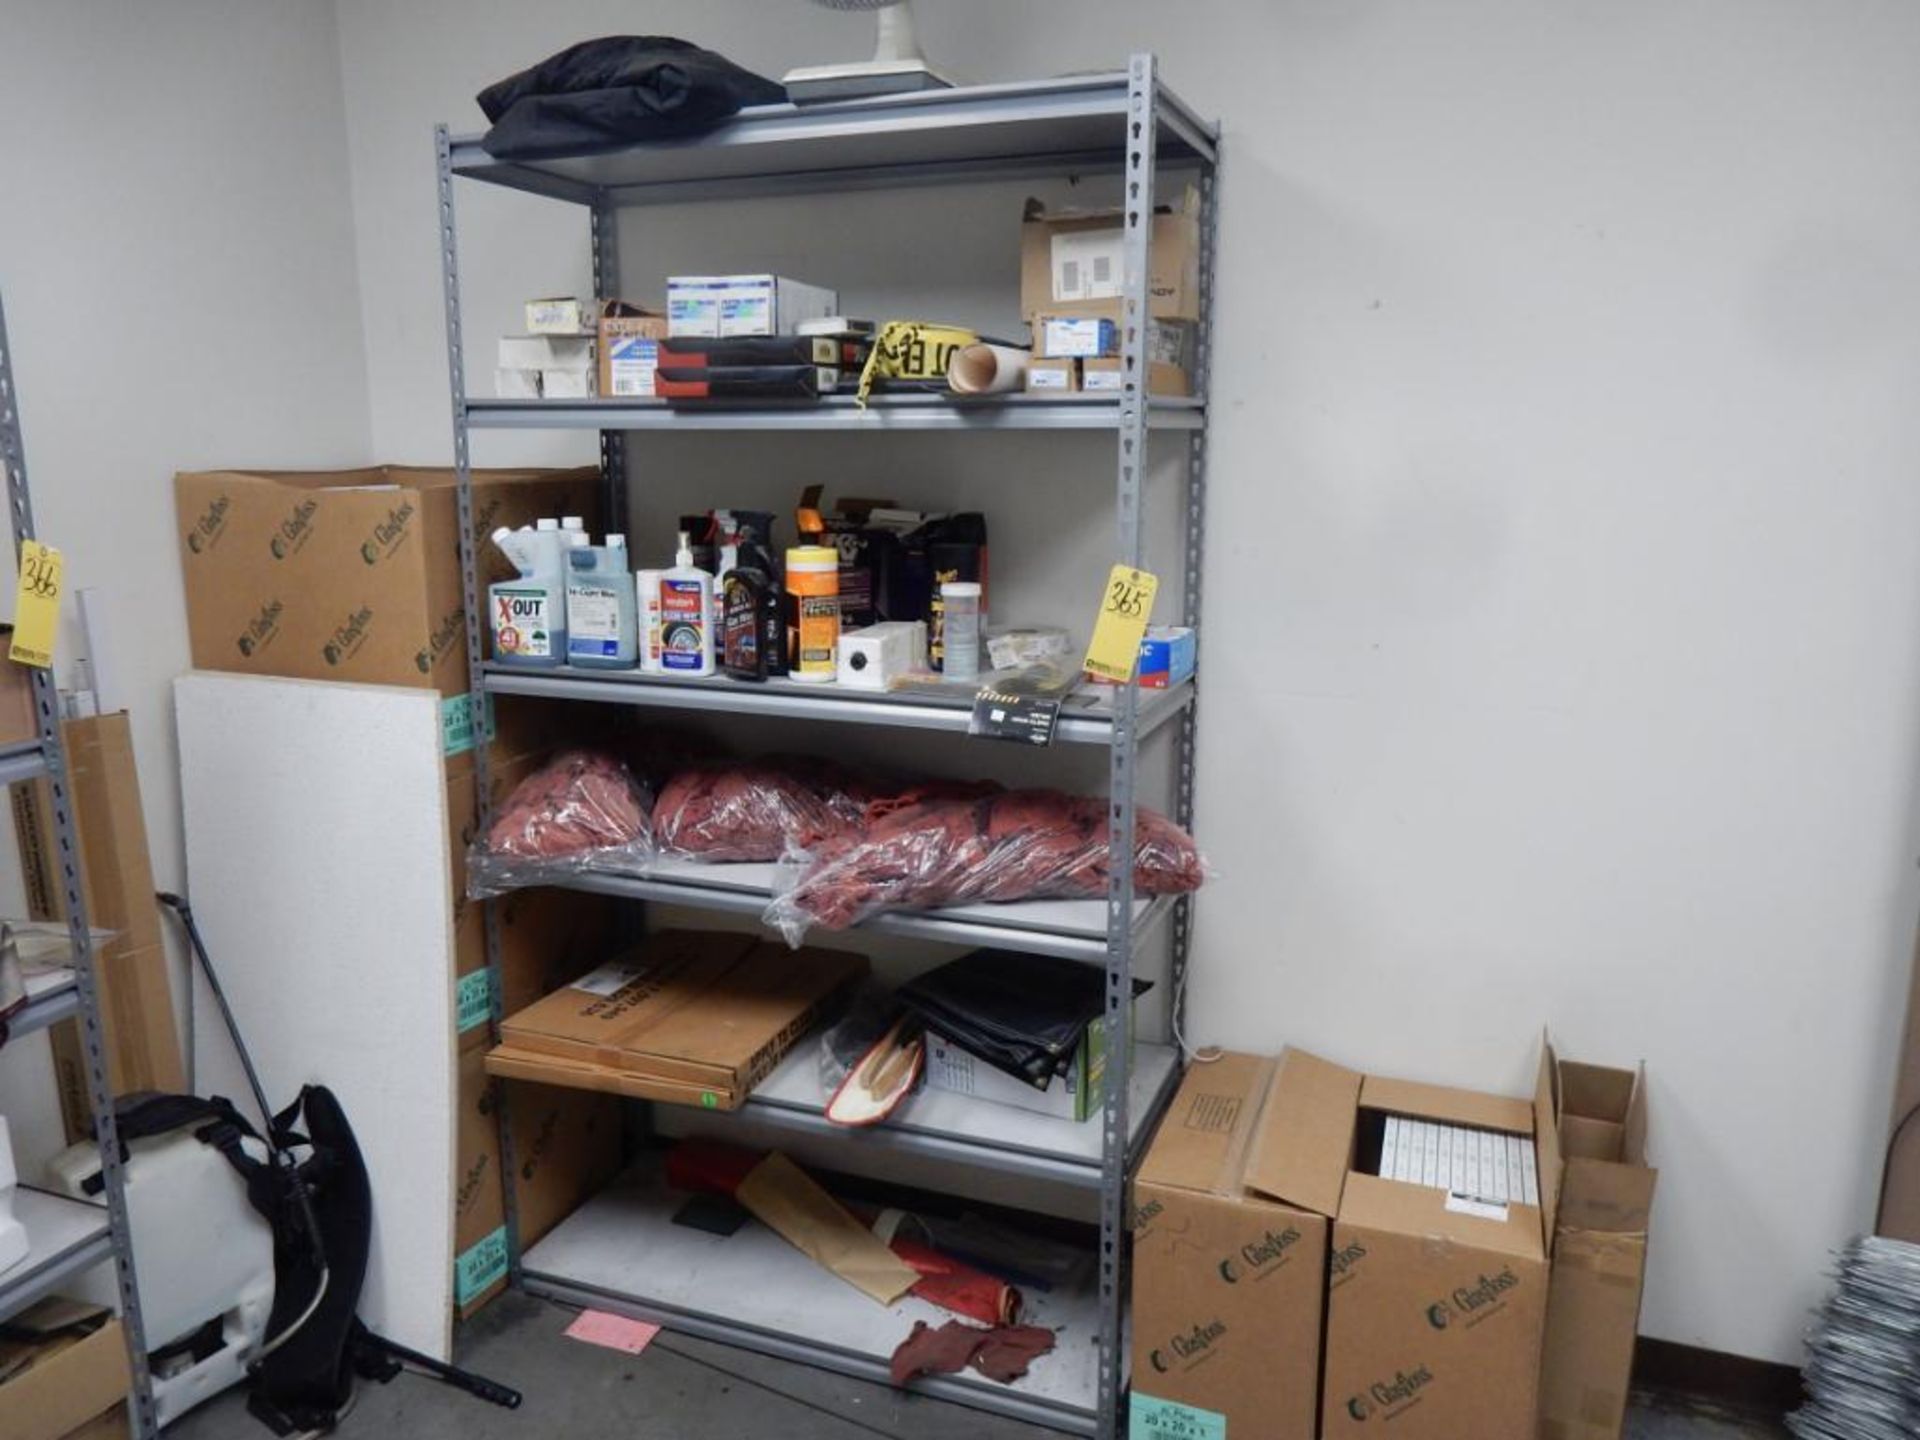 PROCEED TO OFFICE AREA: SHELF W/CONTENTS - RAGS, CLEANERS, ETC.